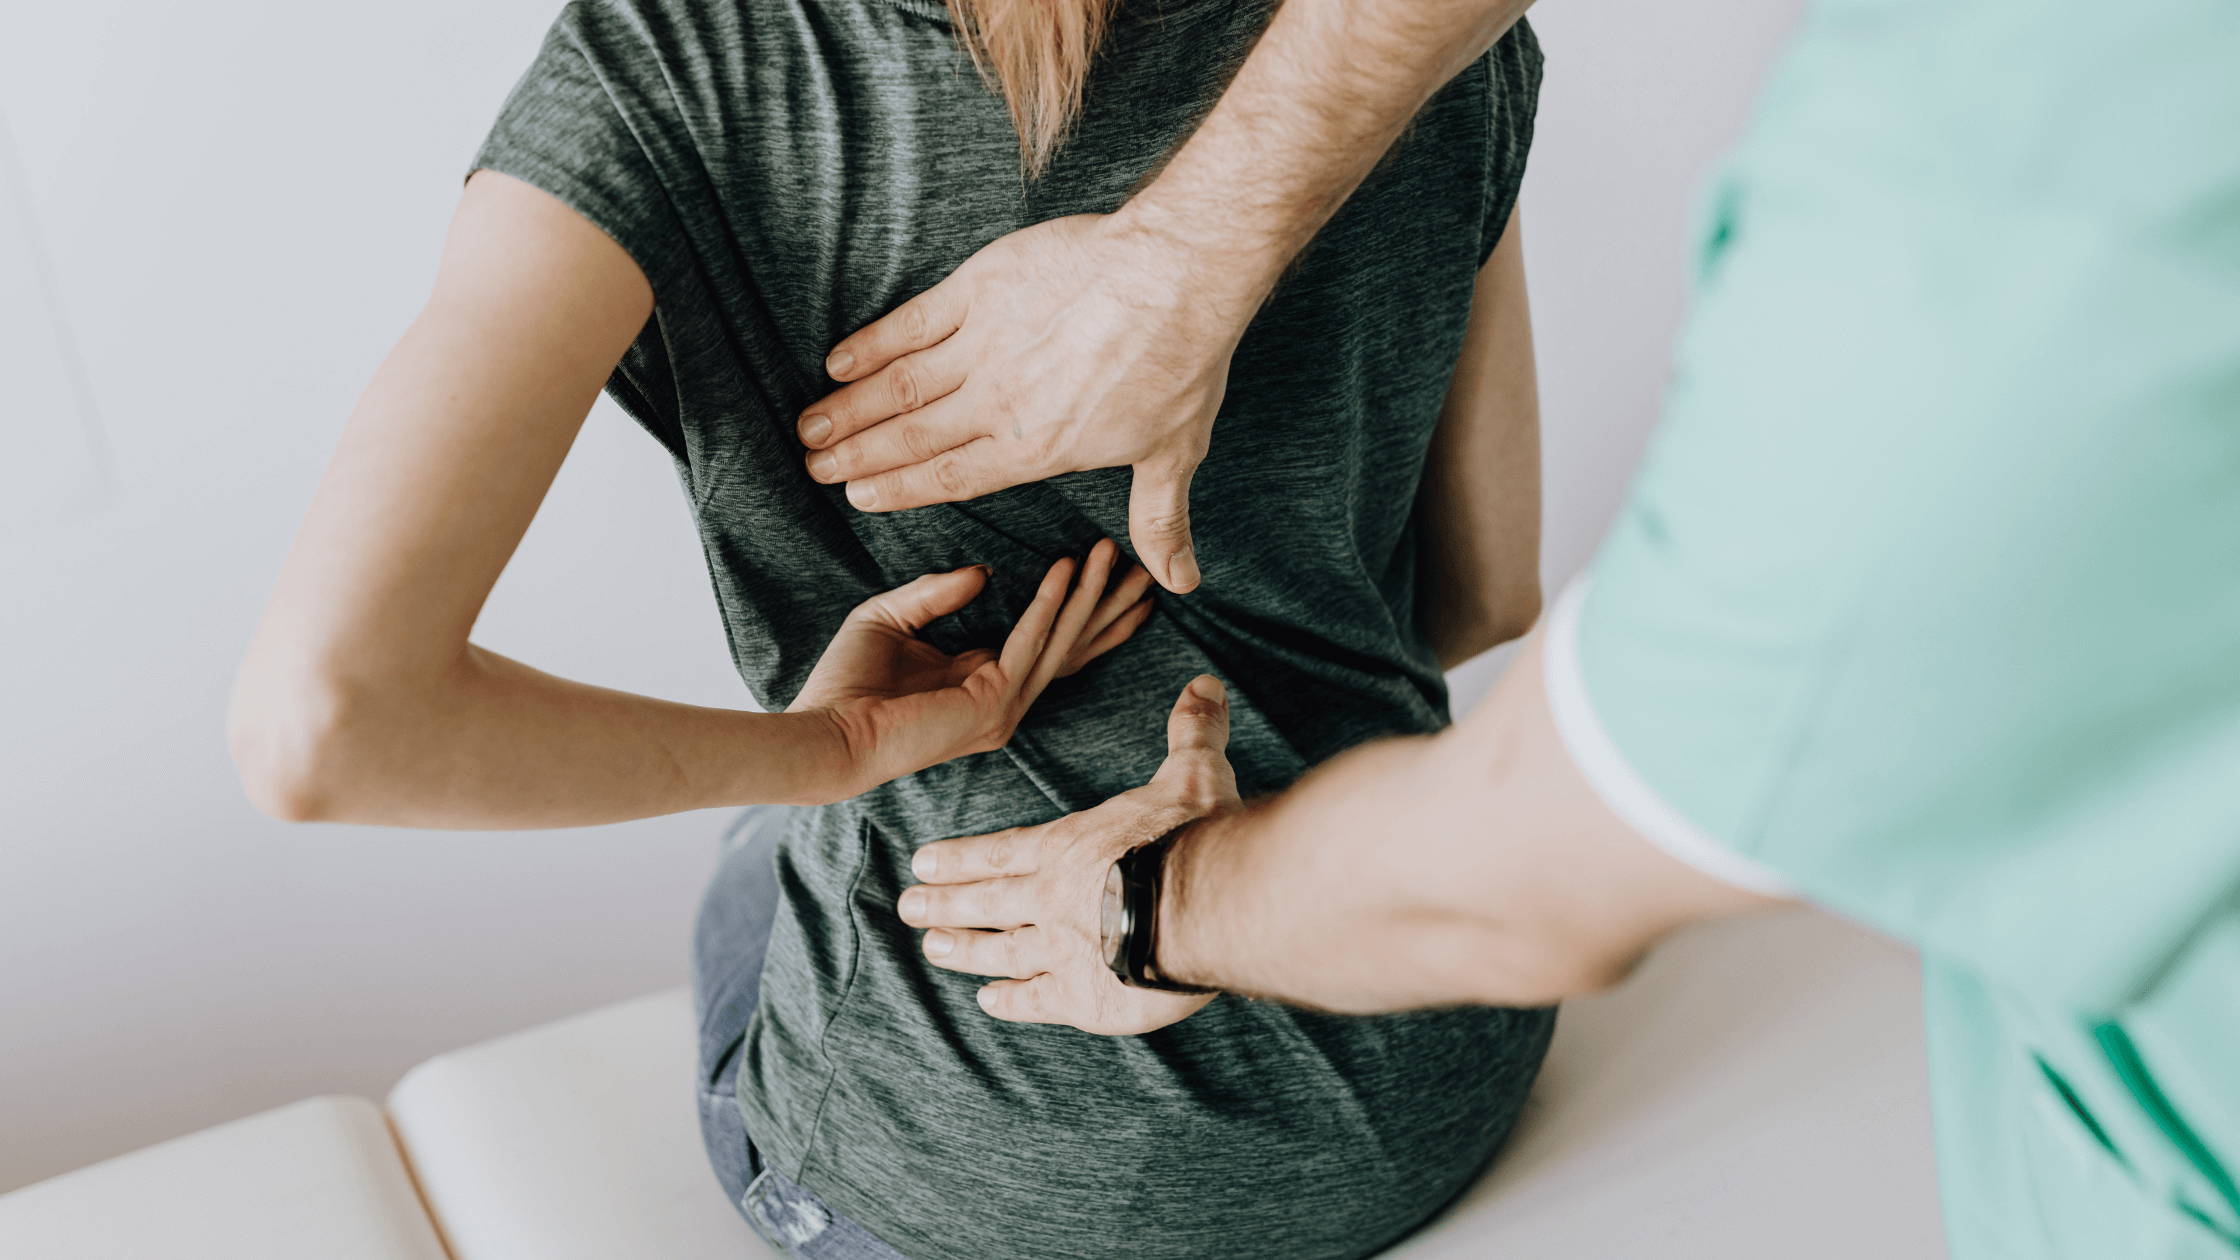 Pelvic Floor Pain: How Can Physical Therapy Help?